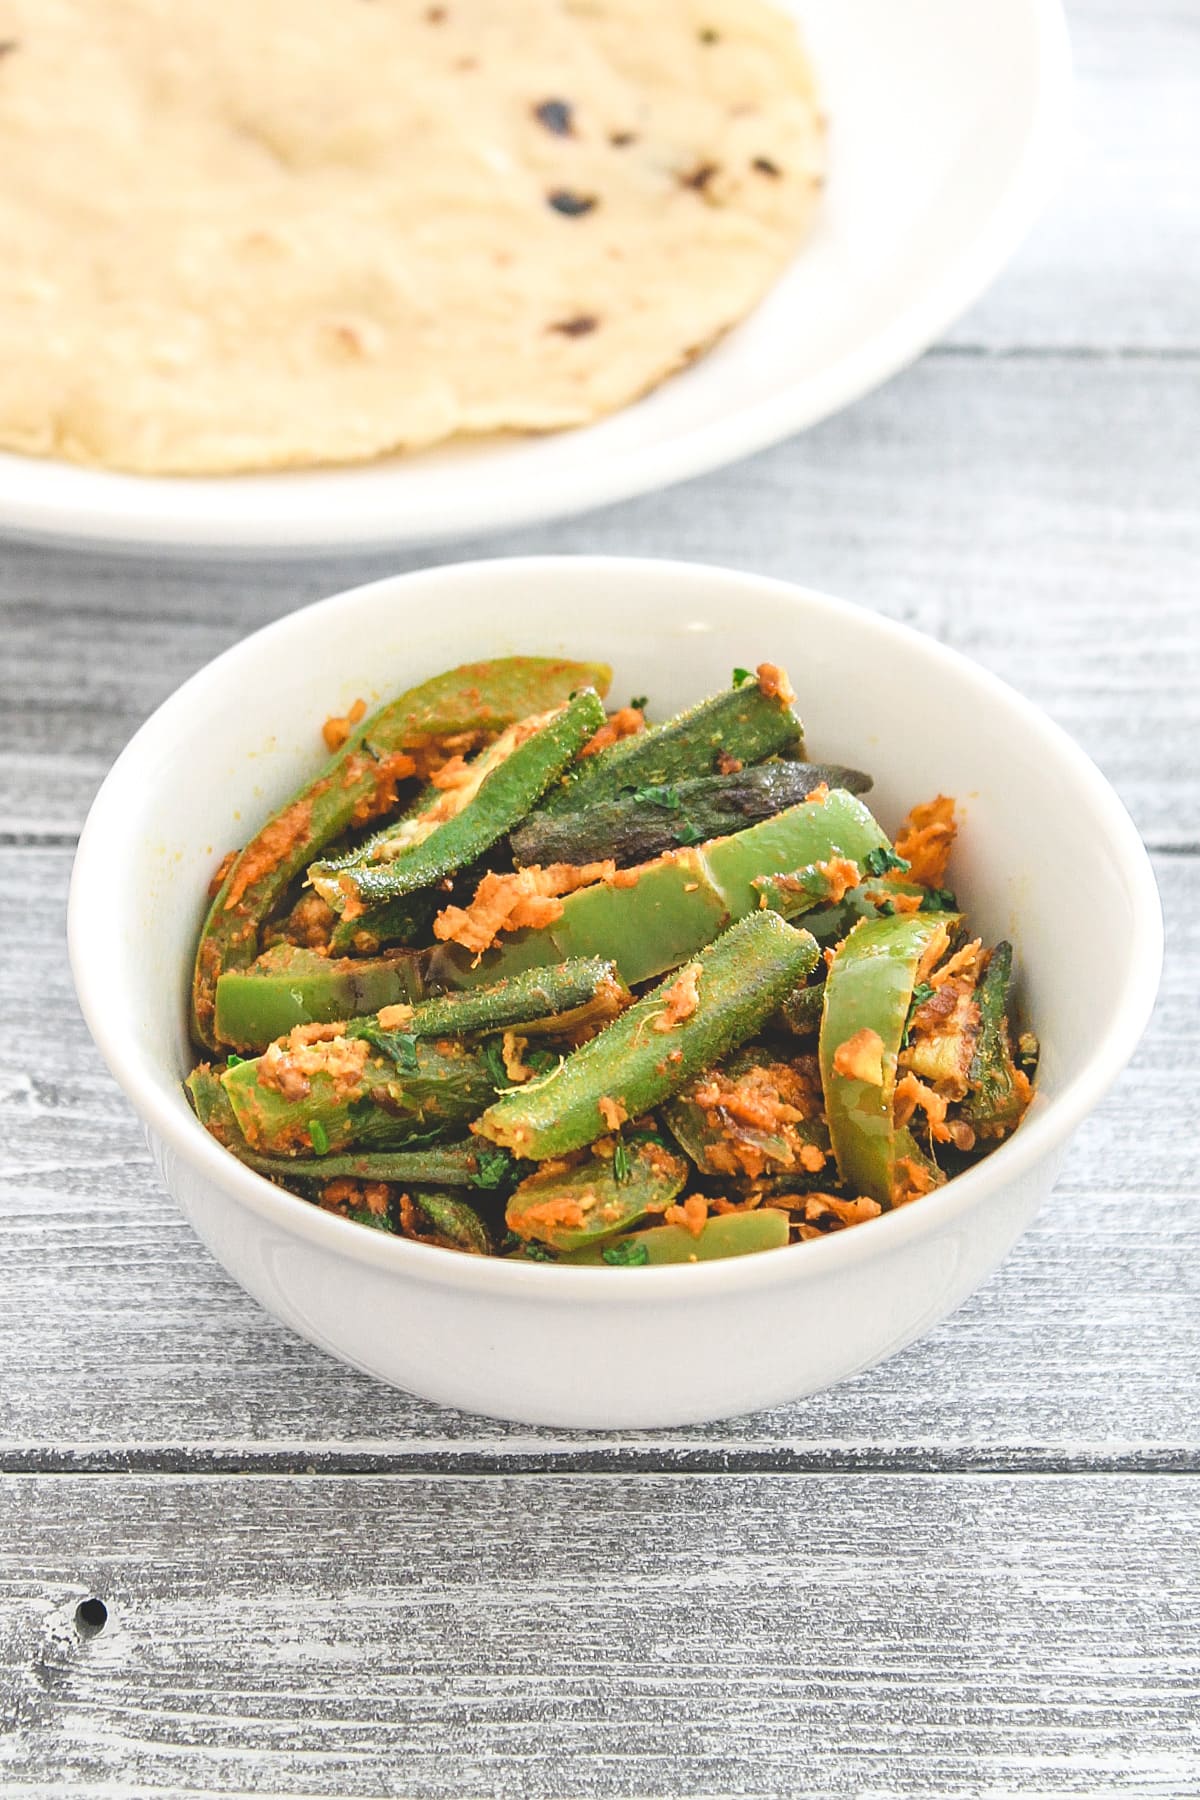 Bhindi capsicum served in a white bowl with roti.